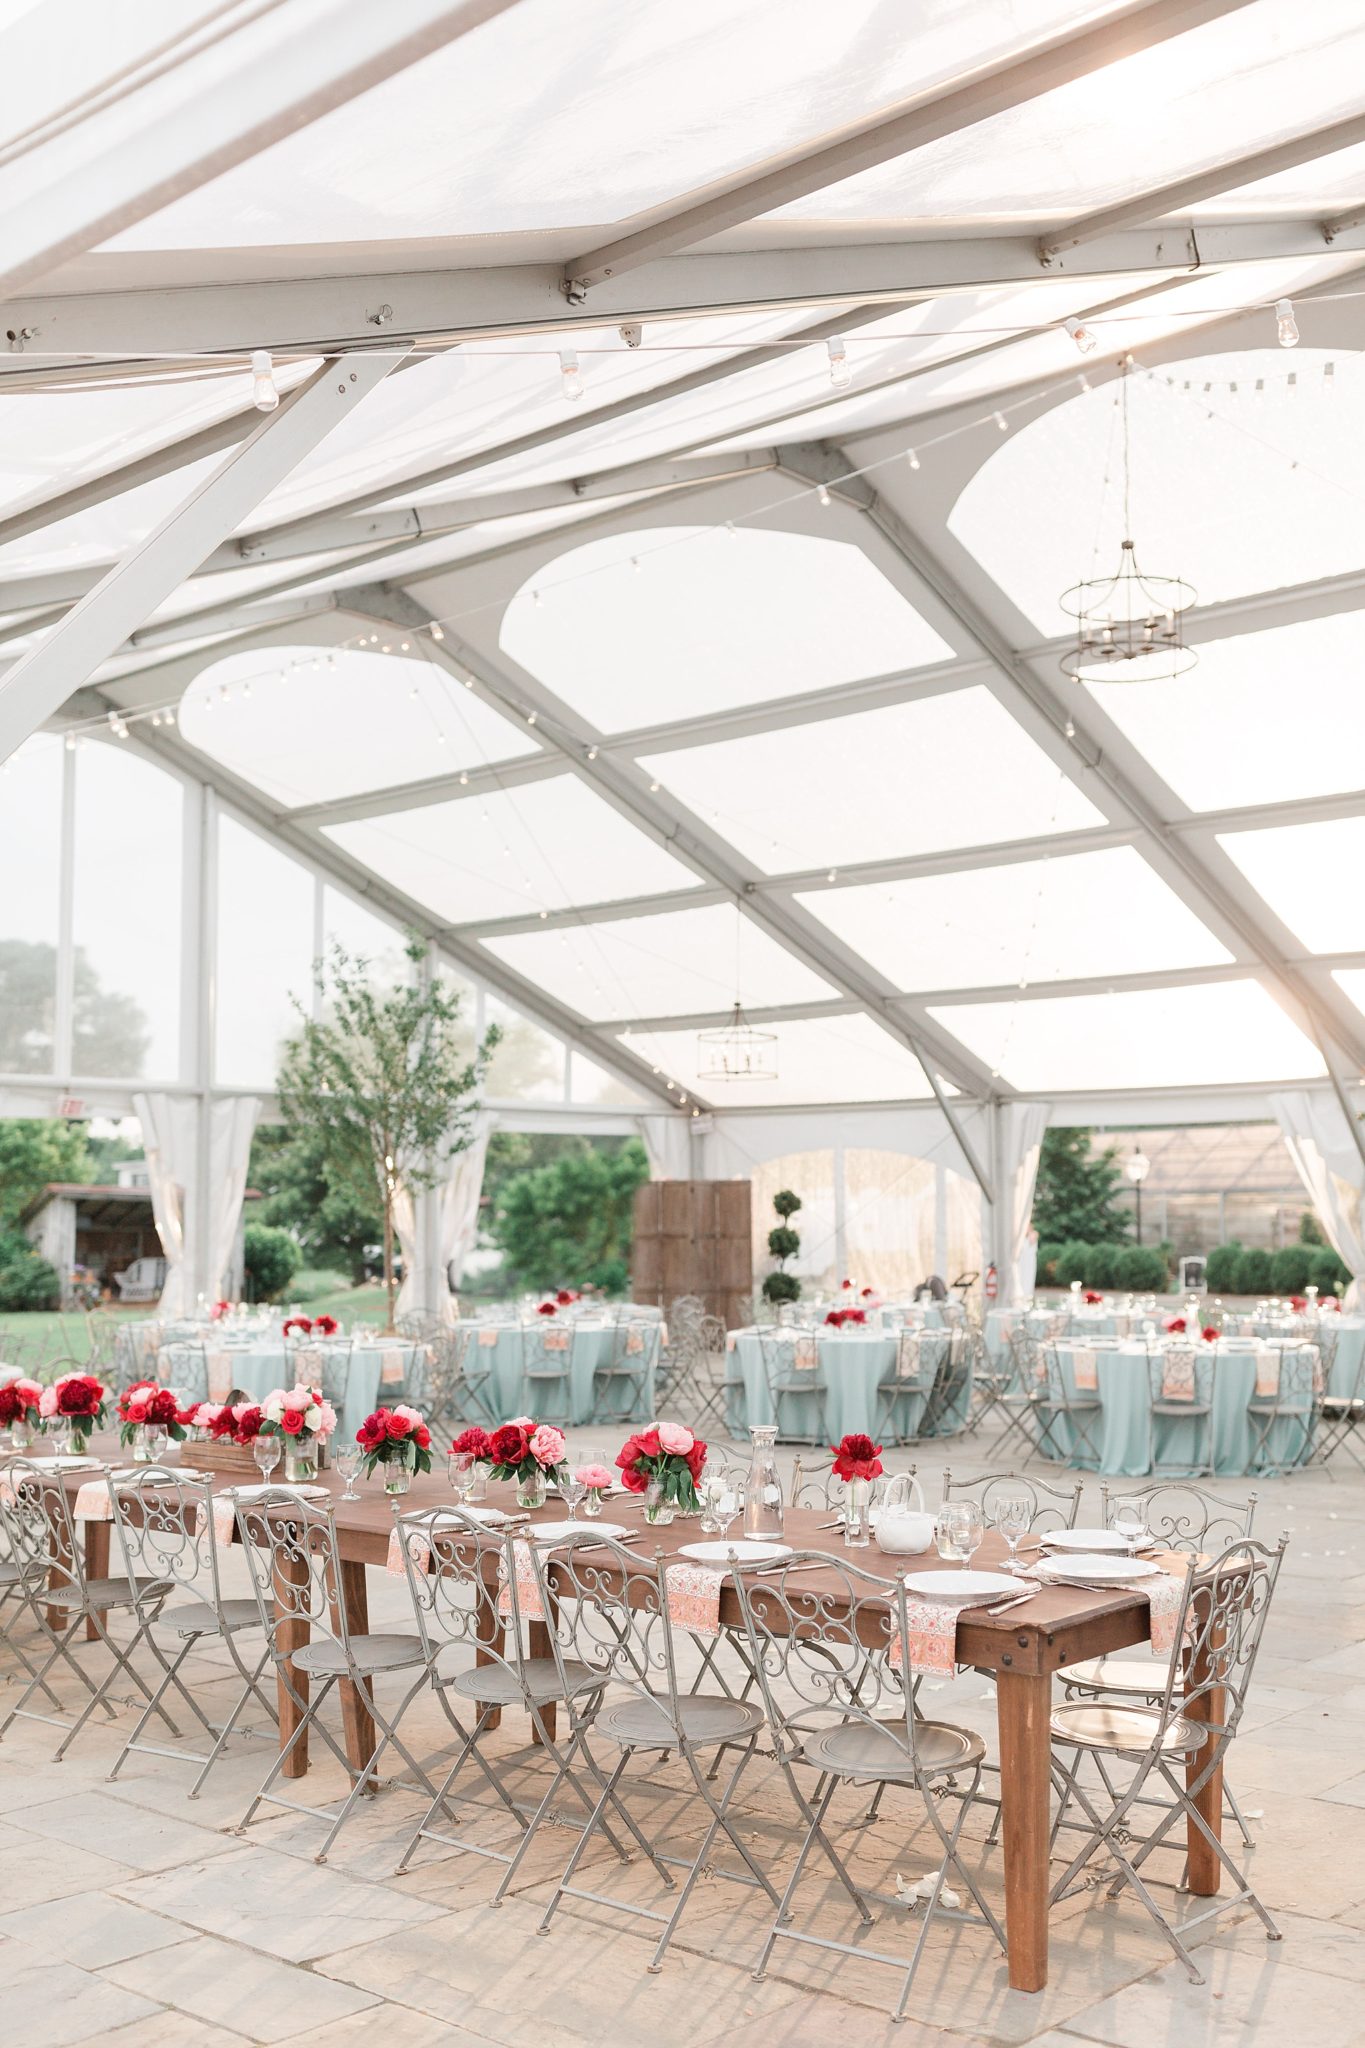 This Market at Grelen wedding was photographed by Washington, DC wedding photographer, Alicia Lacey.